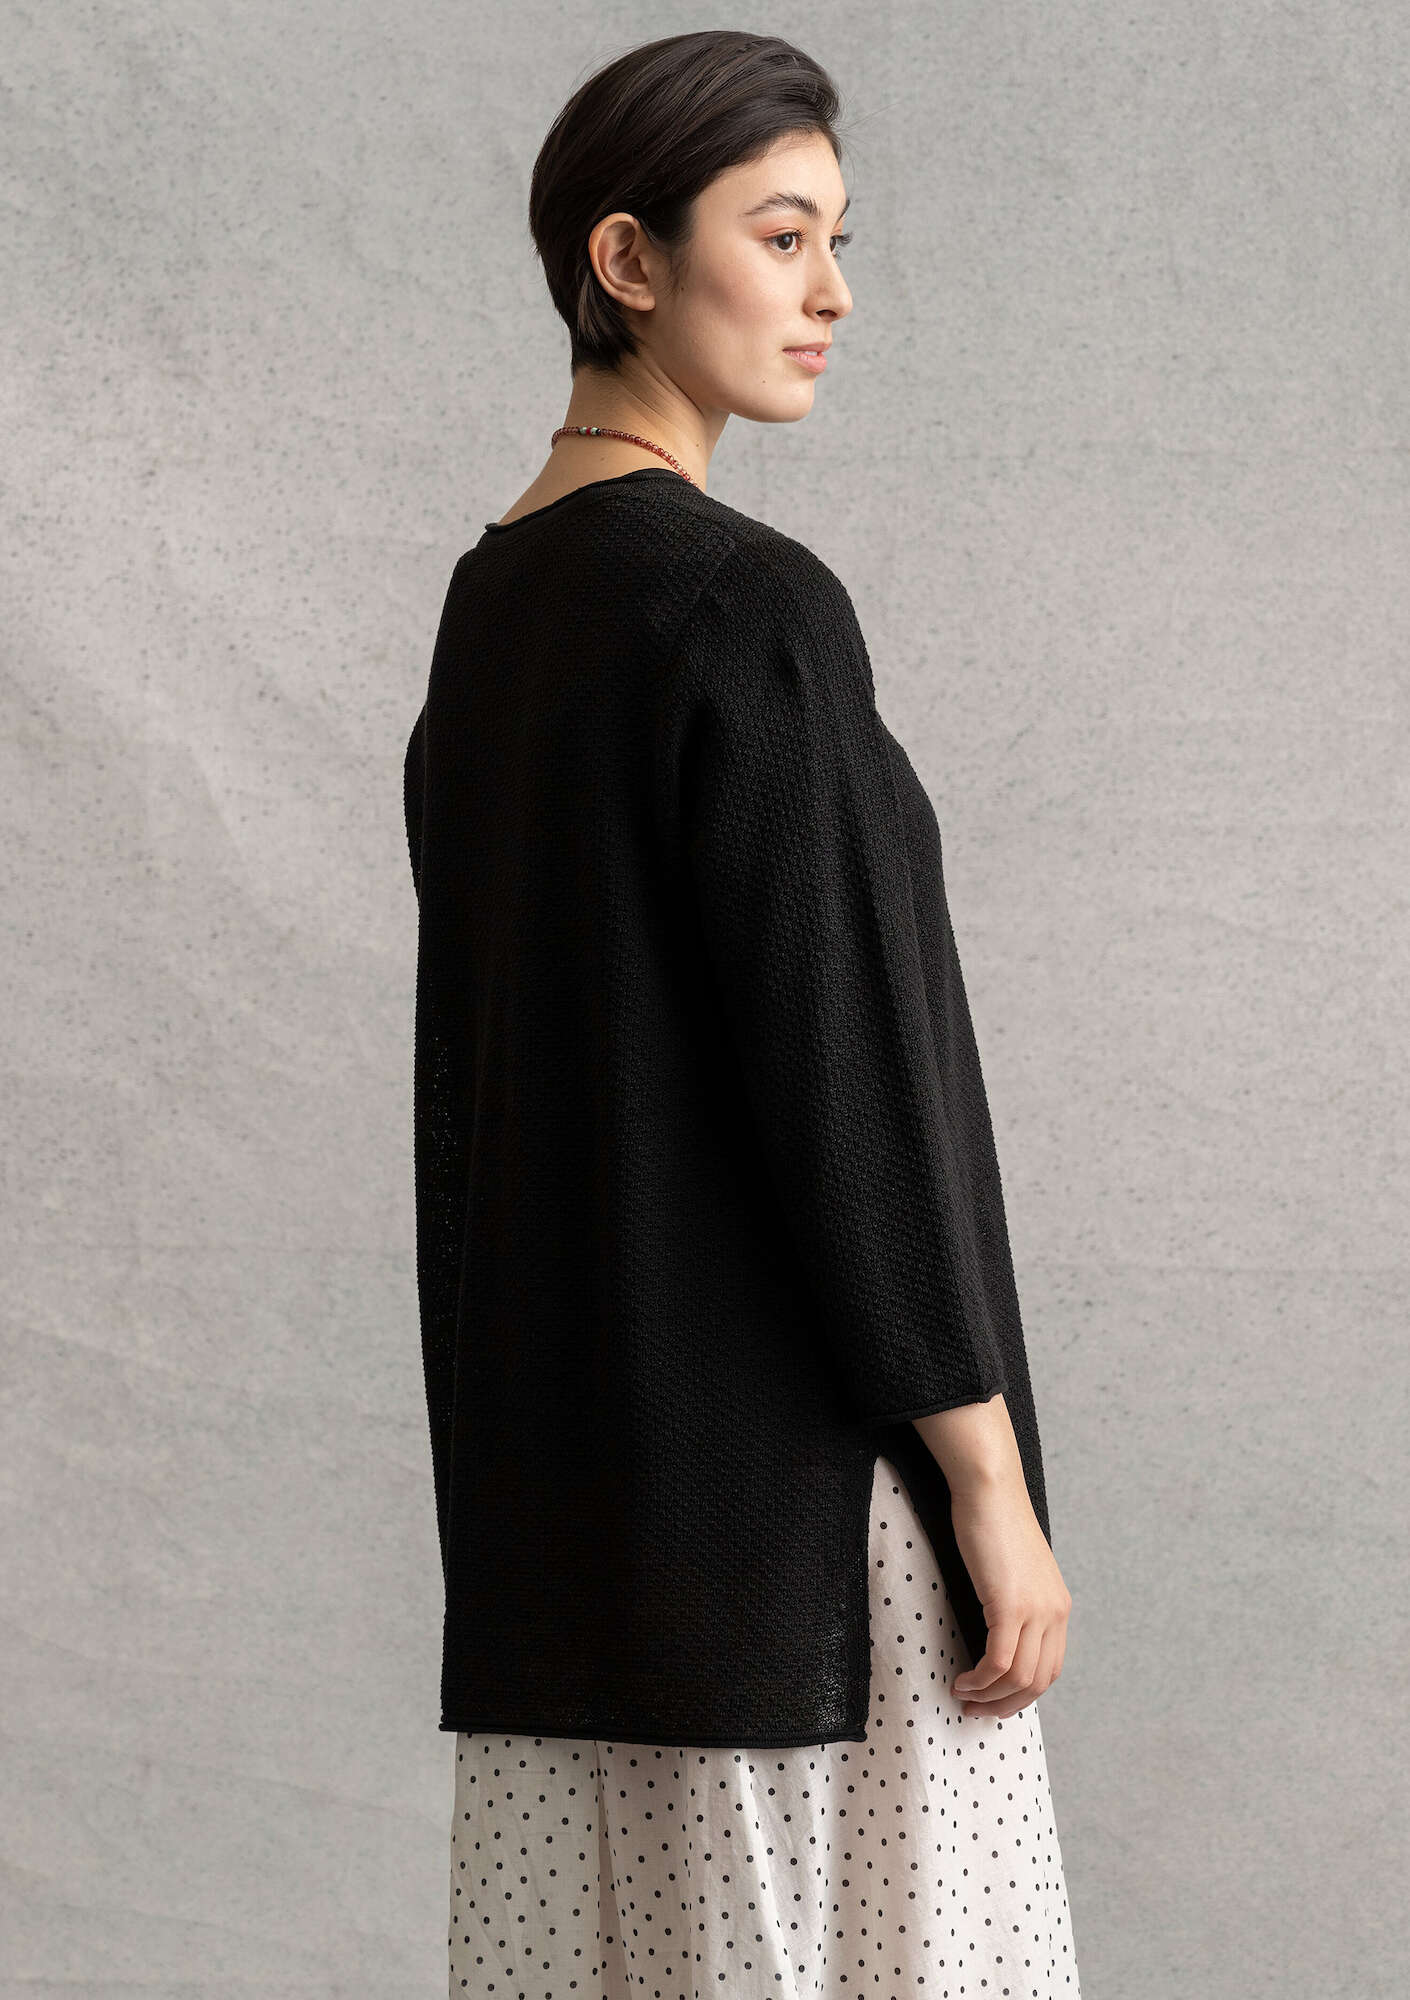 Tunic in a recycled linen knit fabric black